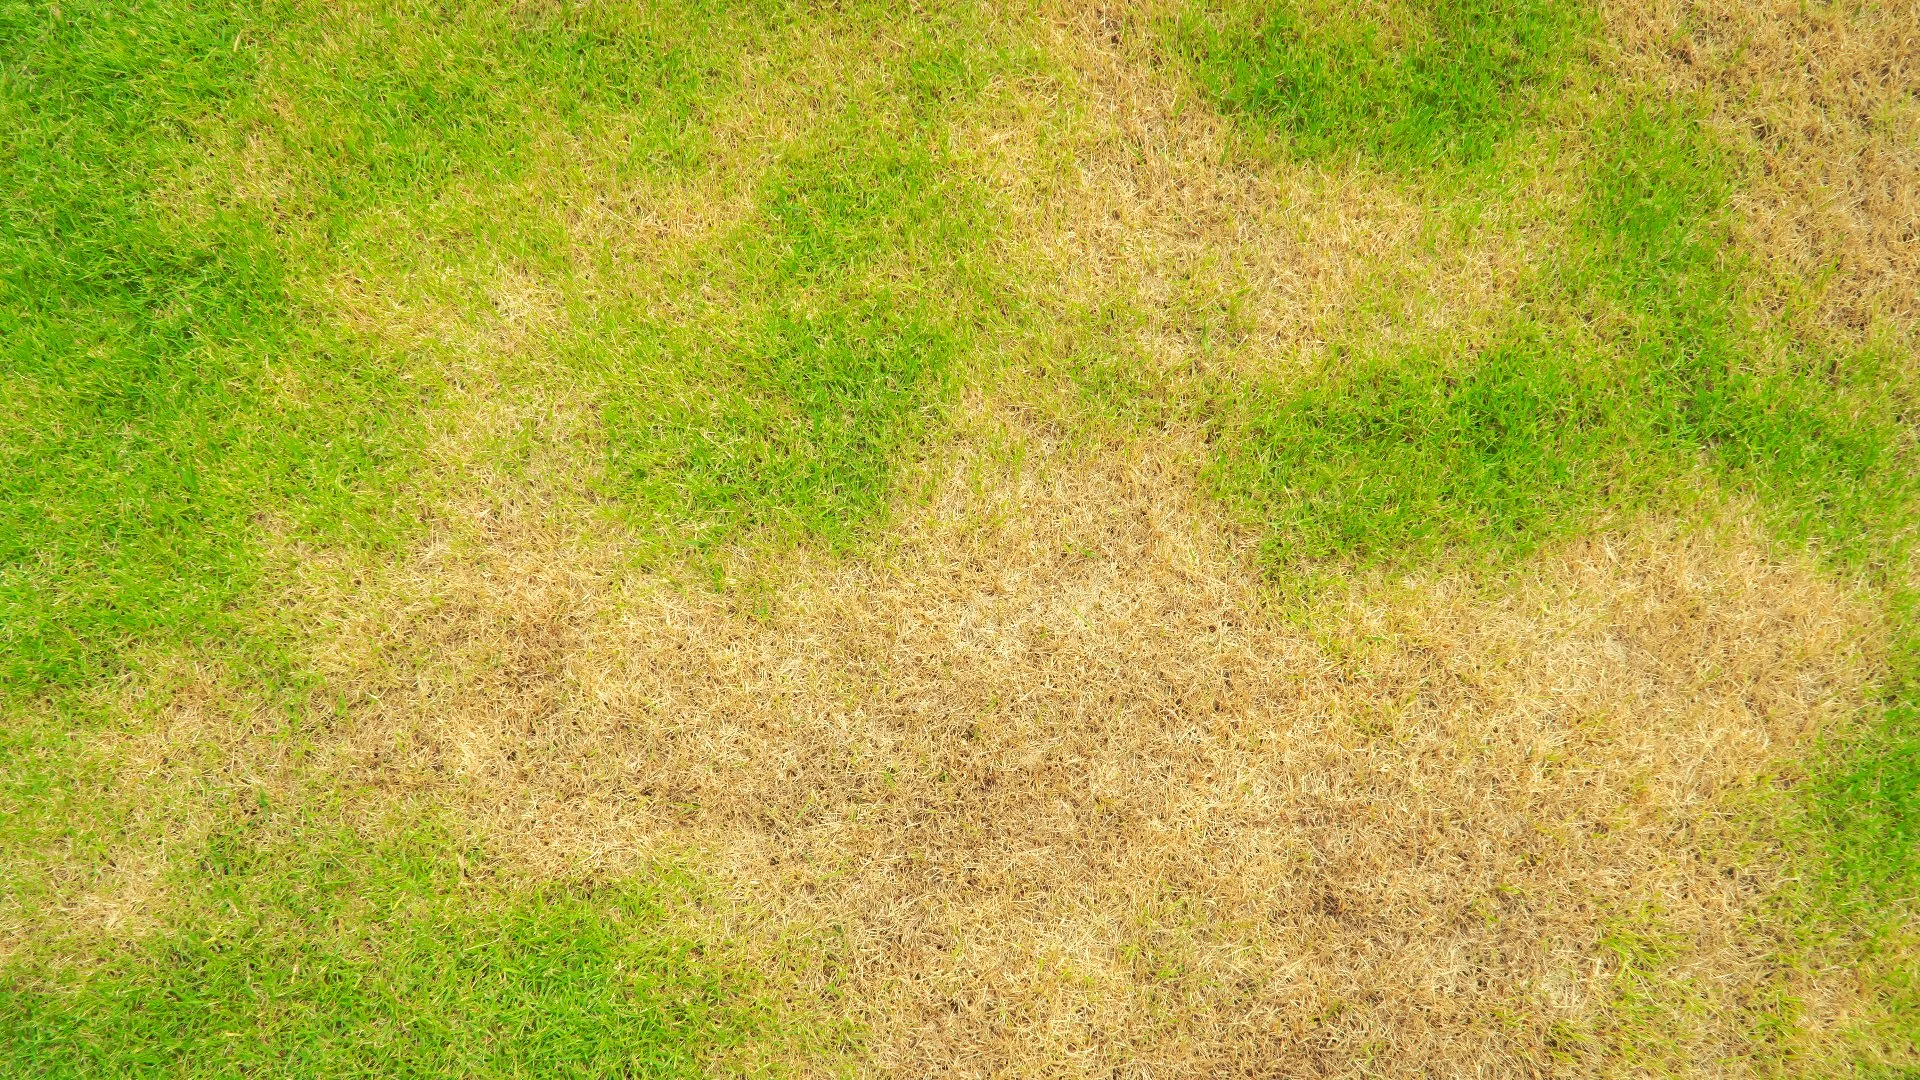 How Do I Know if My Lawn Is Infested With Bermudagrass Mites?